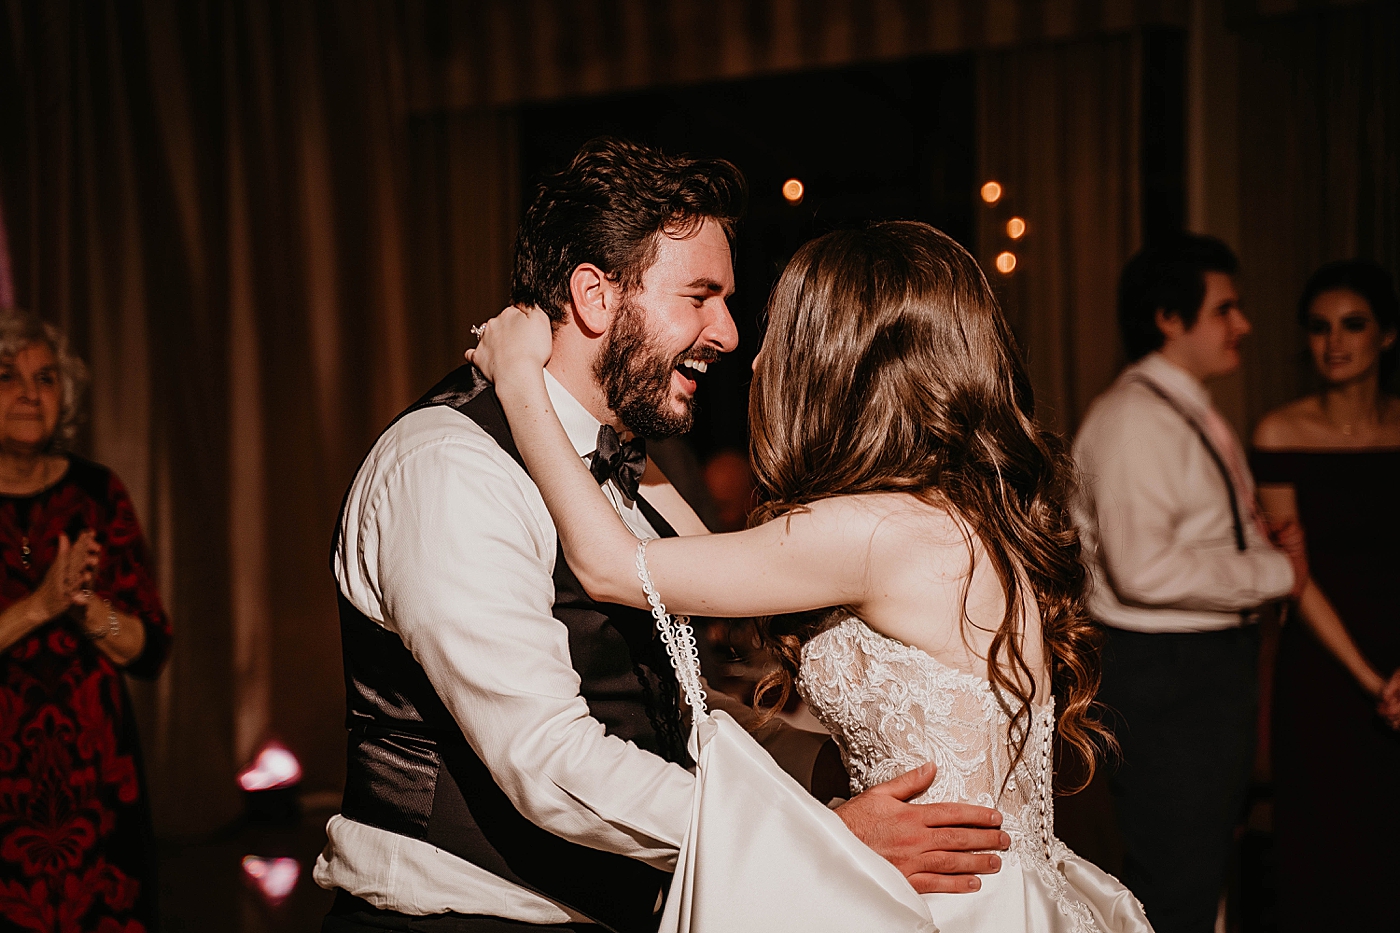 Bride and Groom dancing at reception Breakers West Wedding Photography captured by South Florida Wedding Photographer Krystal Capone Photography 